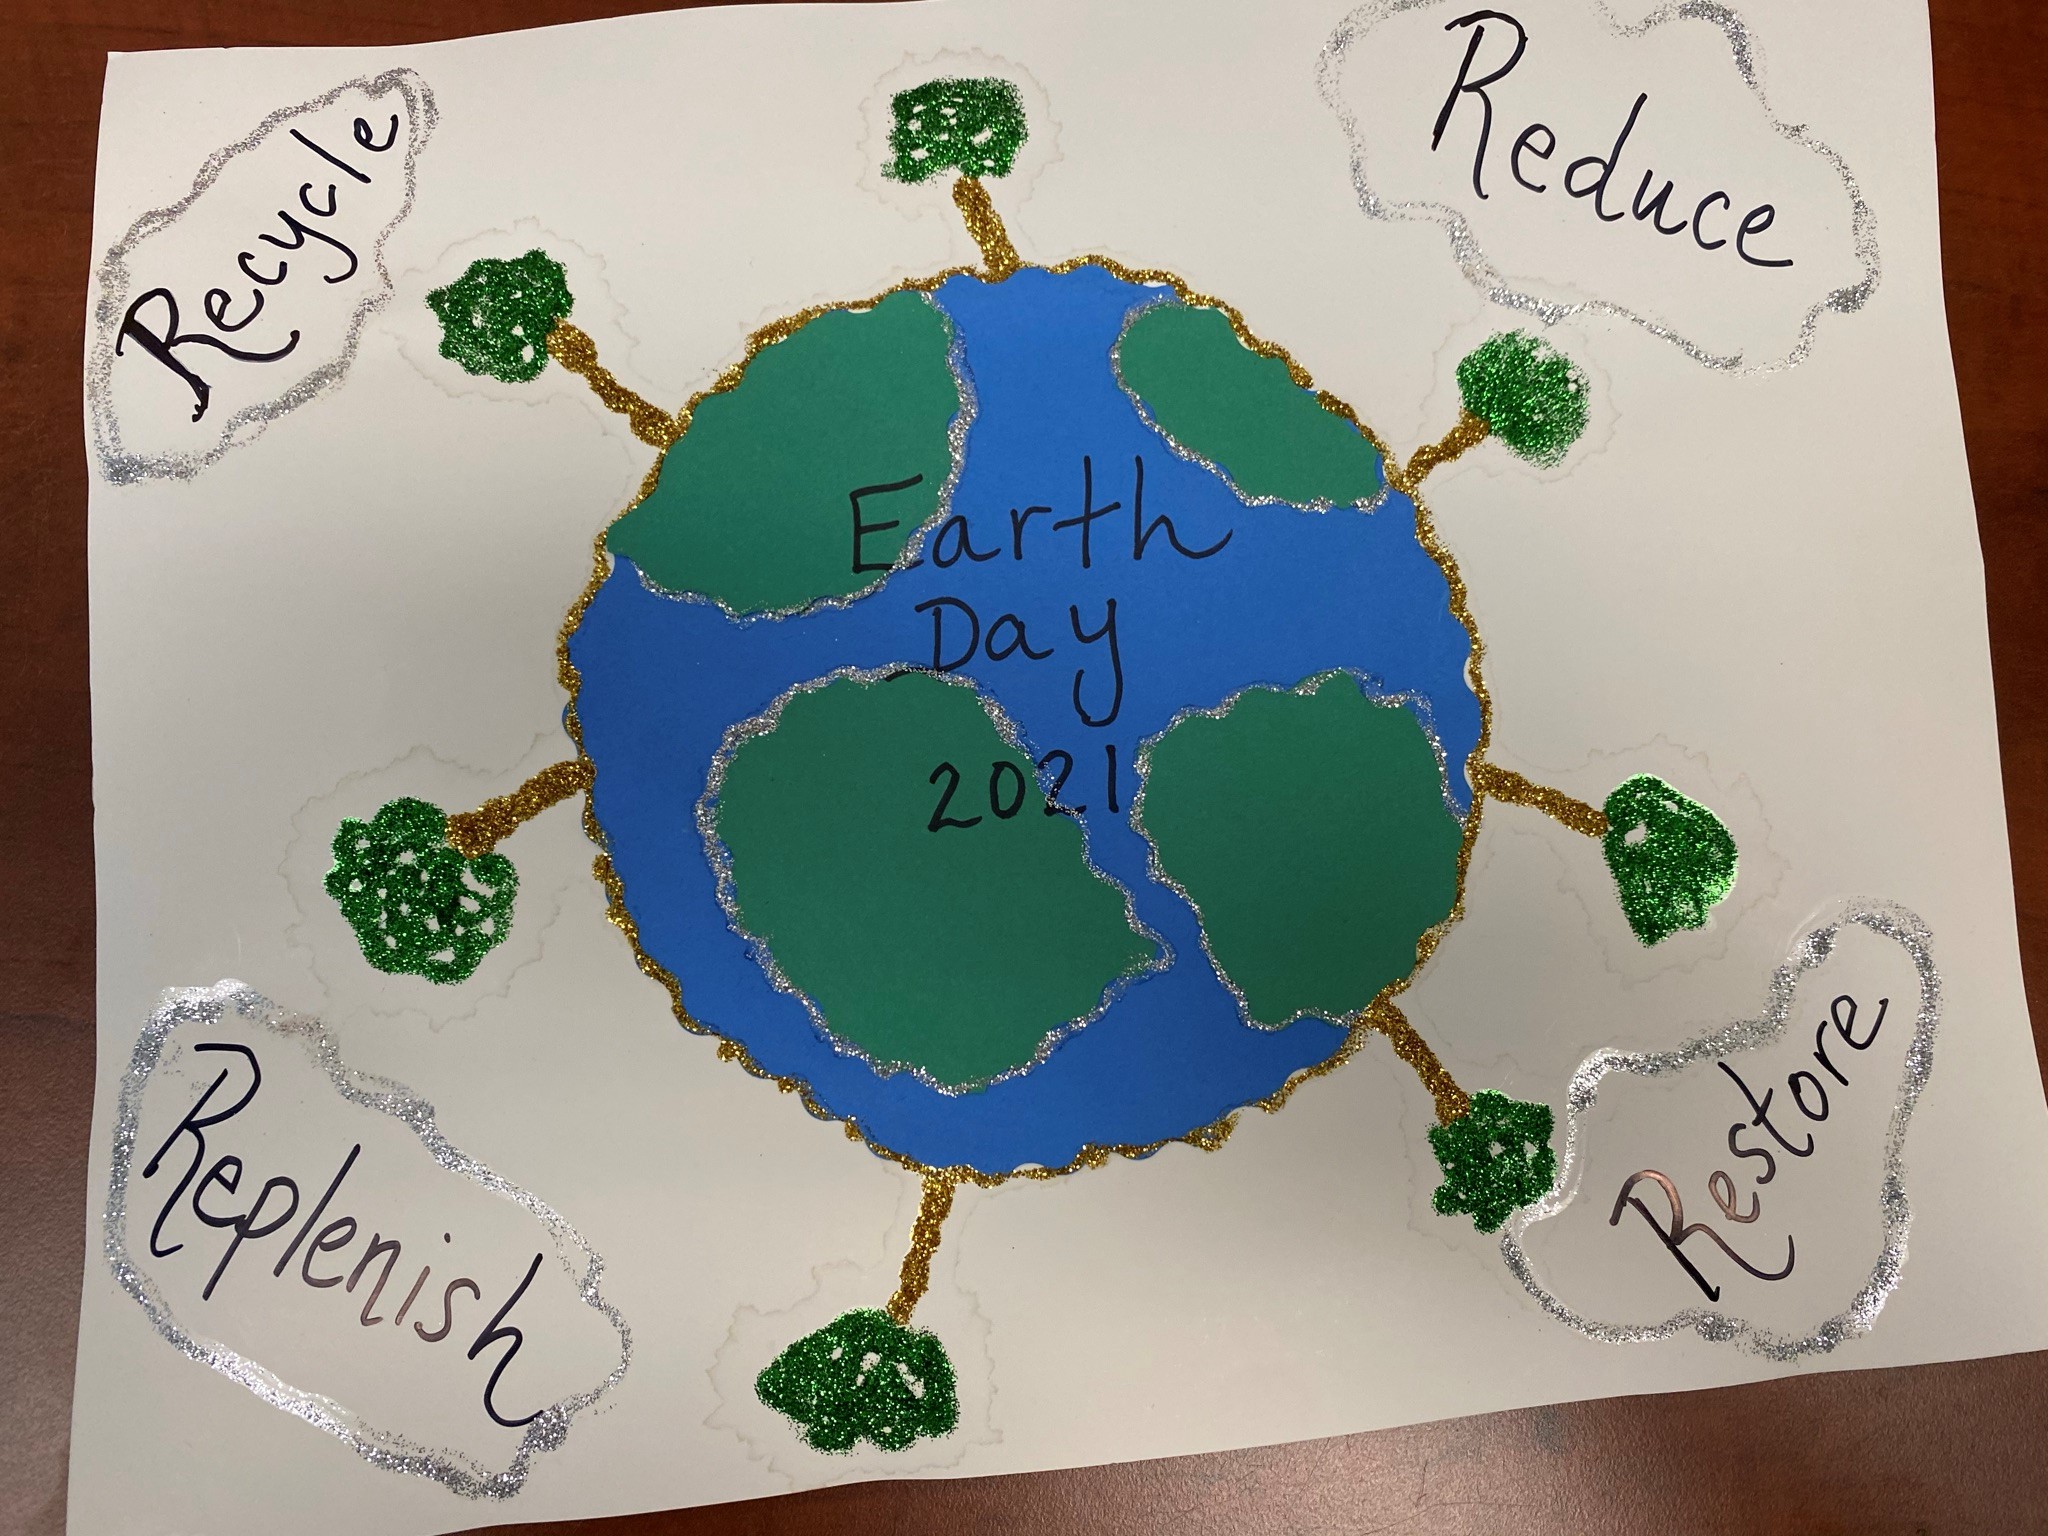 A handmade Earth Day poster